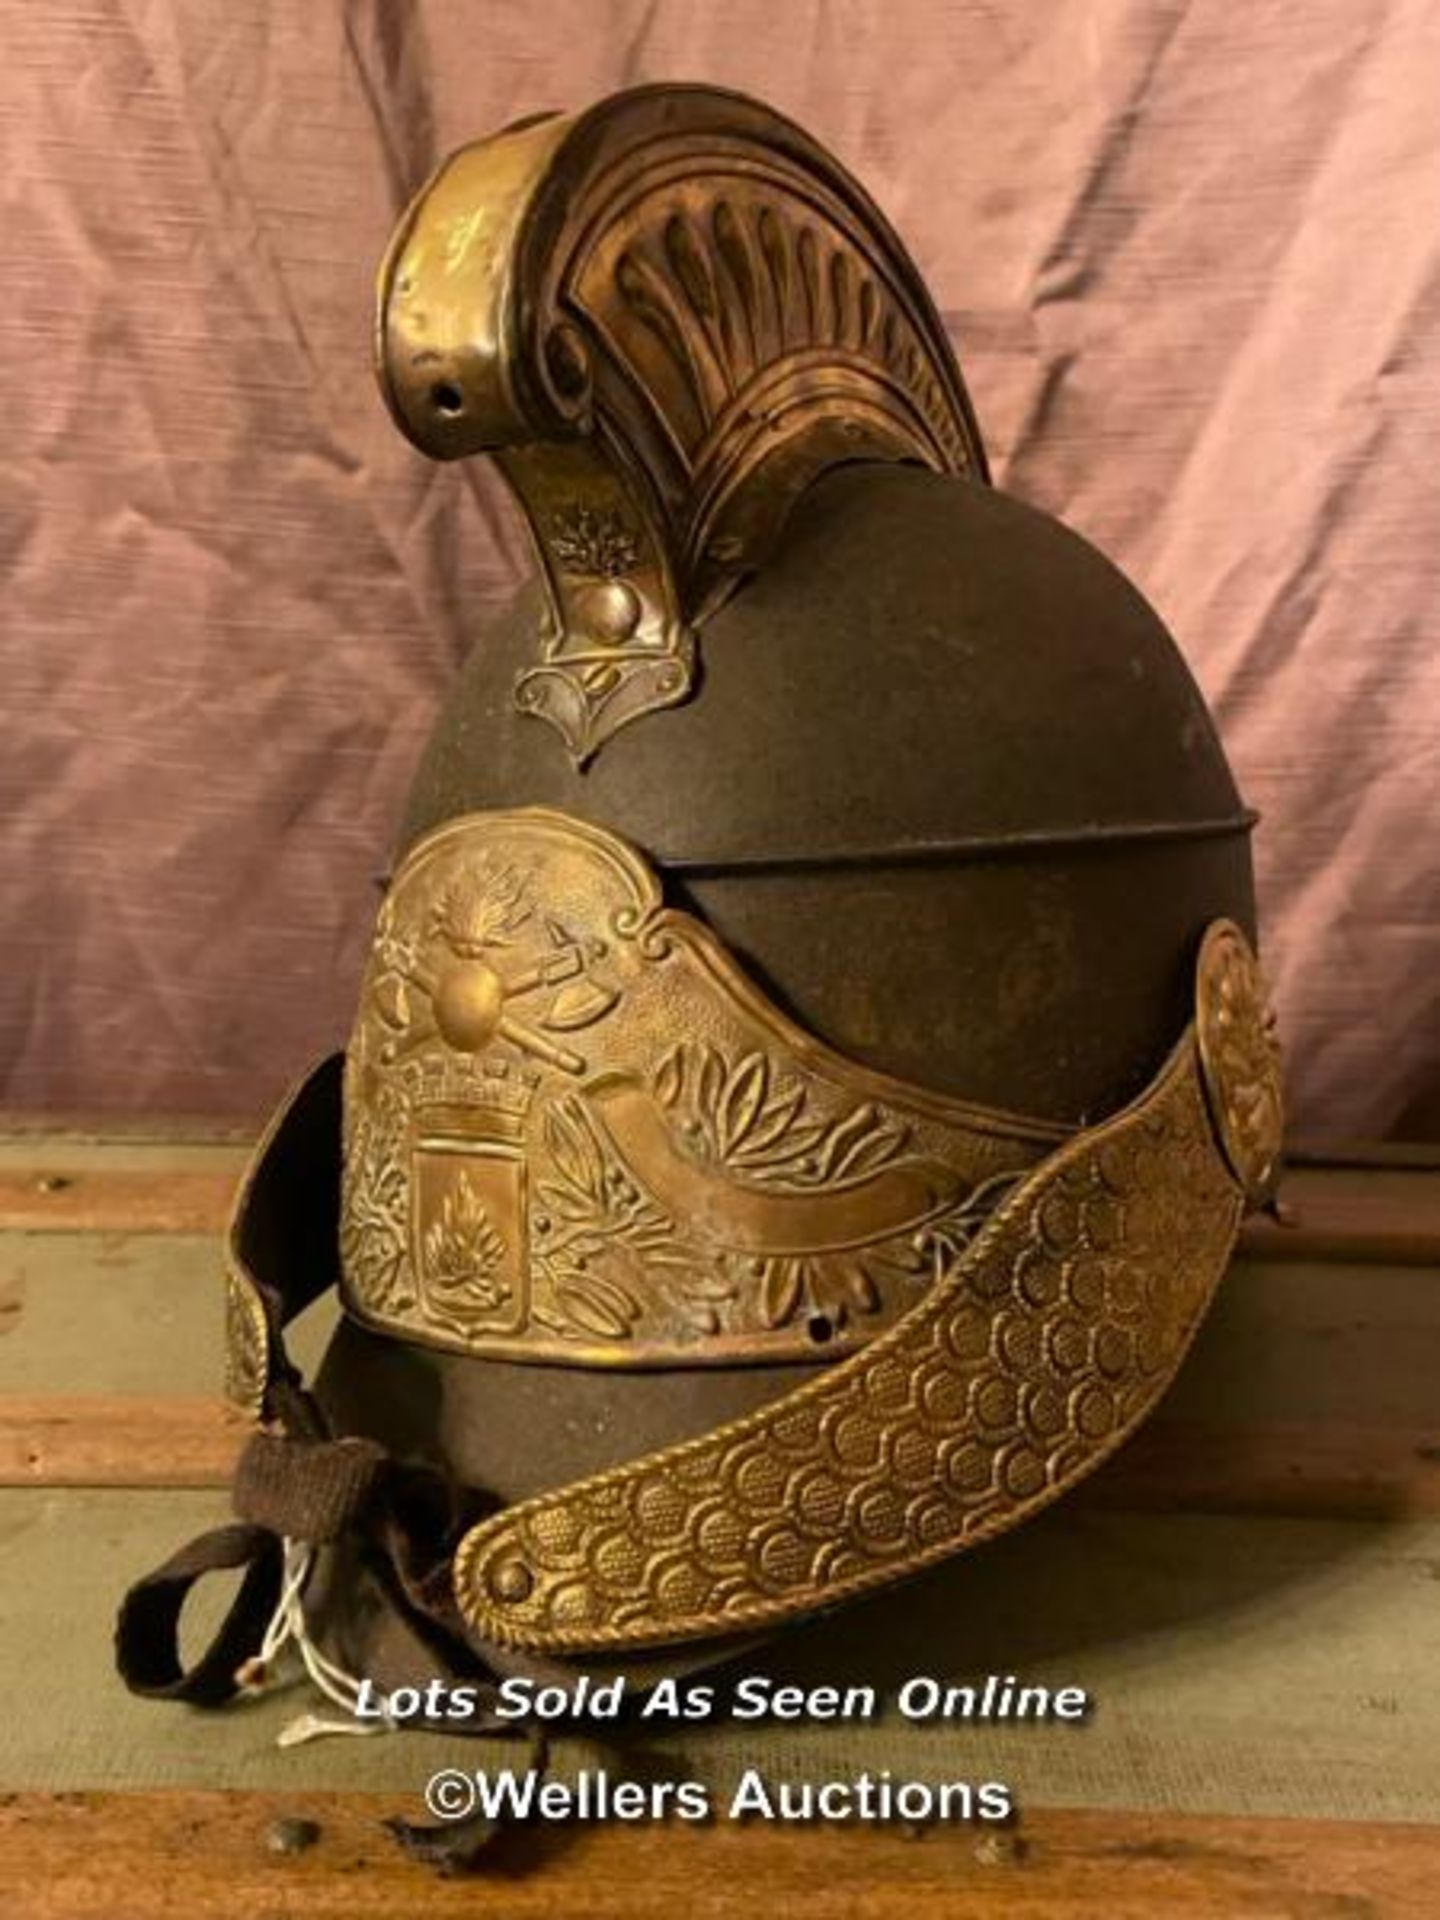 CIRCA 1800 FRENCH SAPEURS AND POMPIERS HELMET